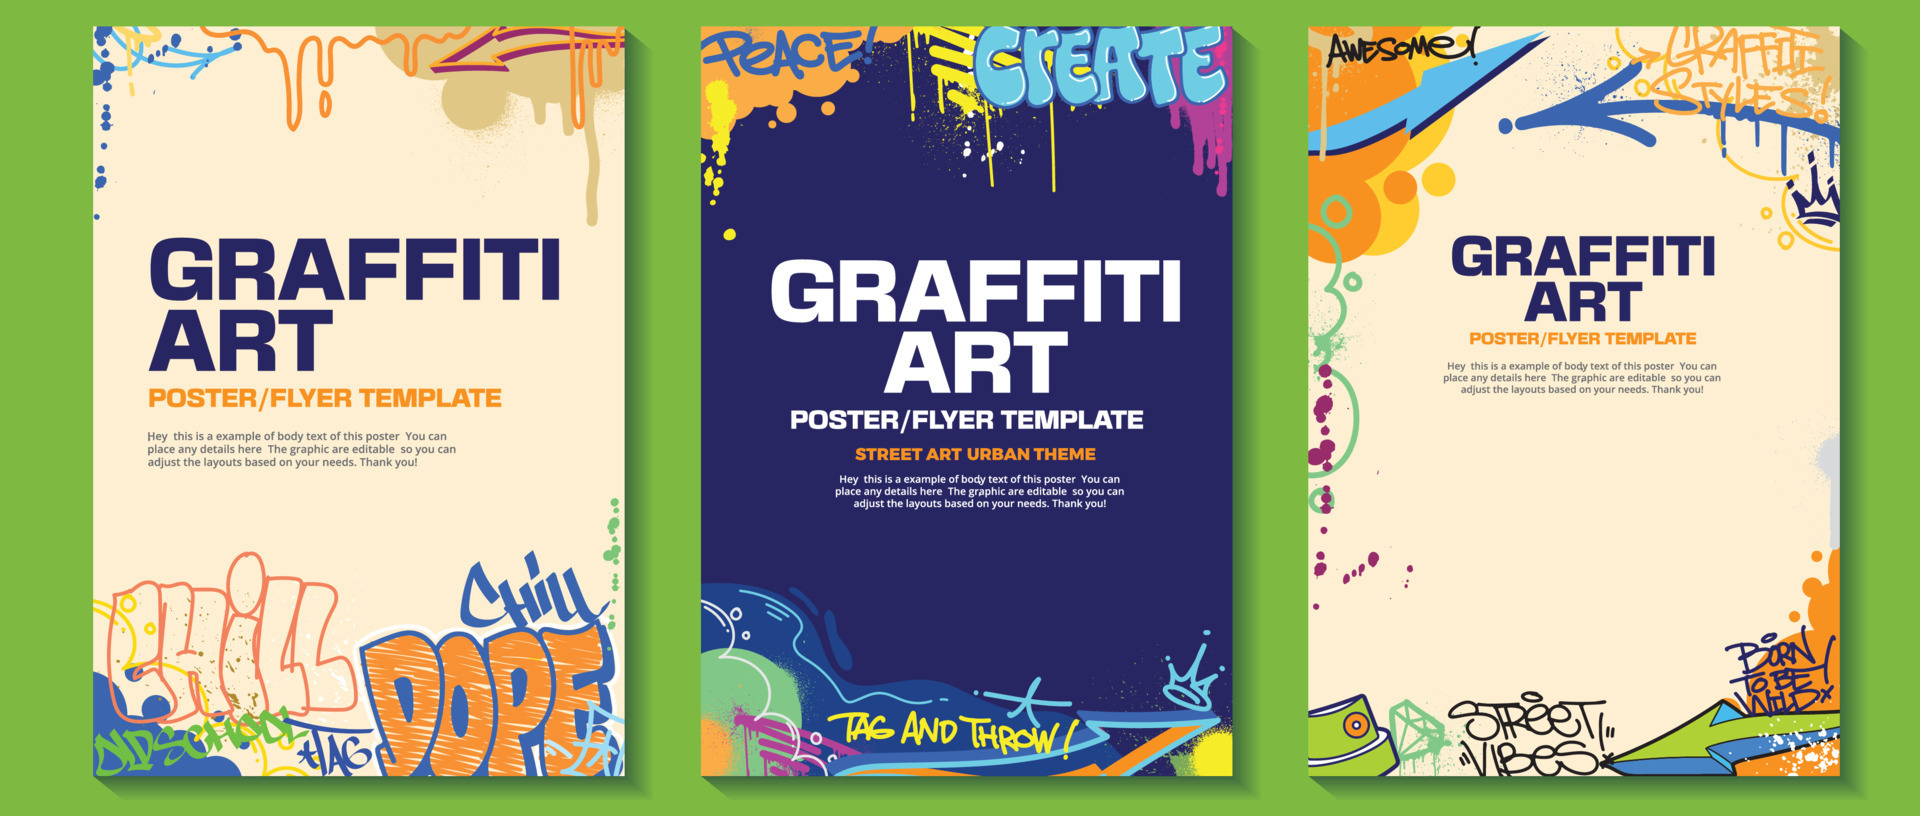 Modern graffiti art poster or flyer design with colorful tags, throw up ...